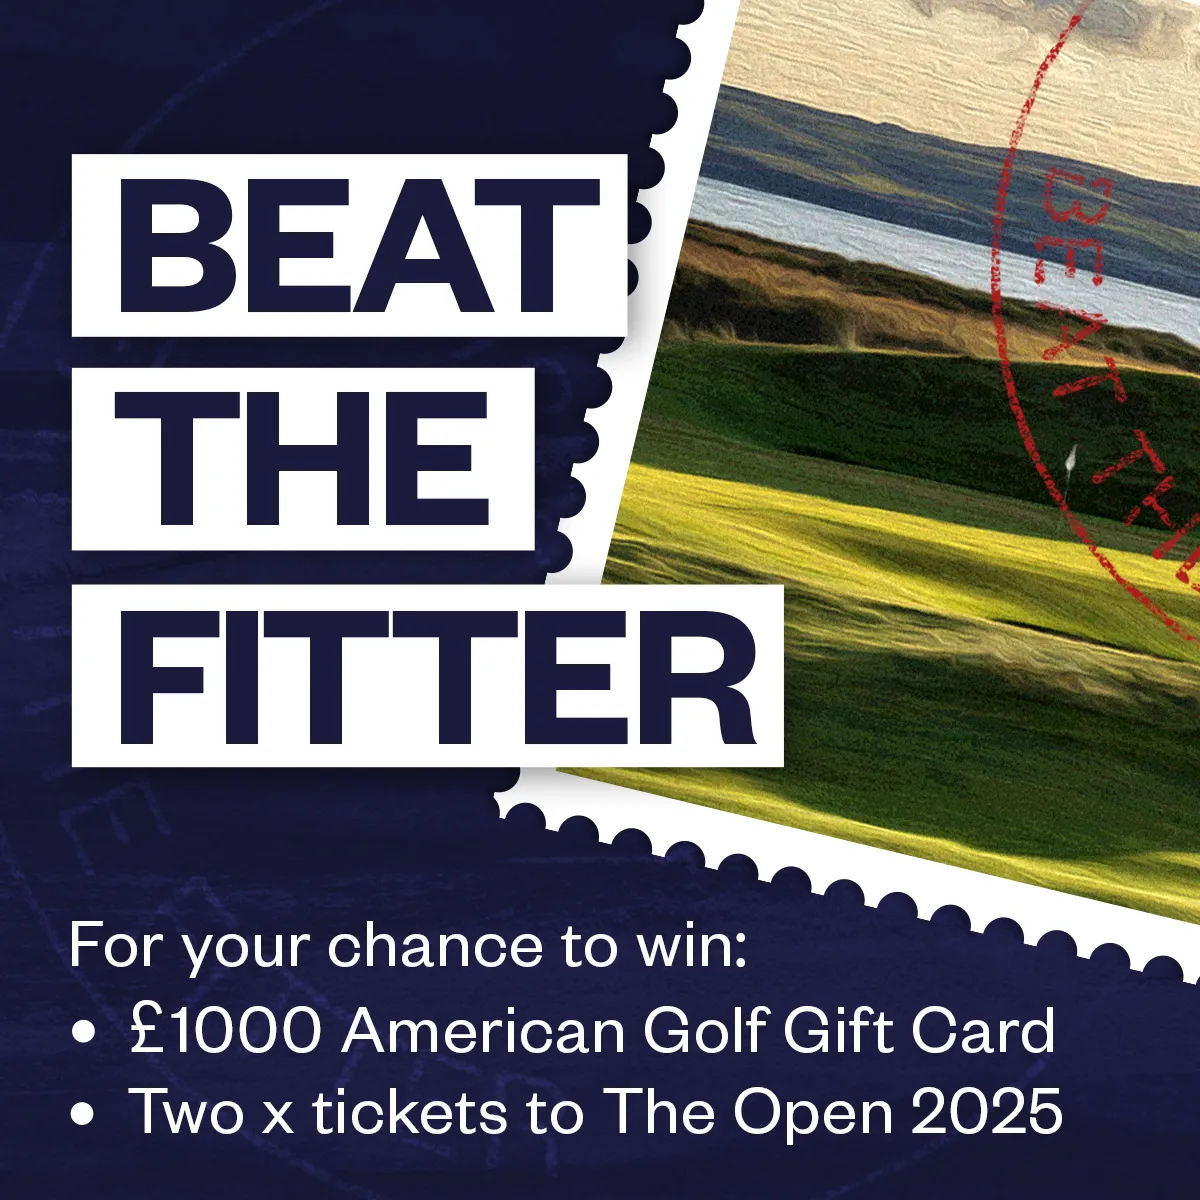 Beat The Fitter - Closest to 123 yards wins